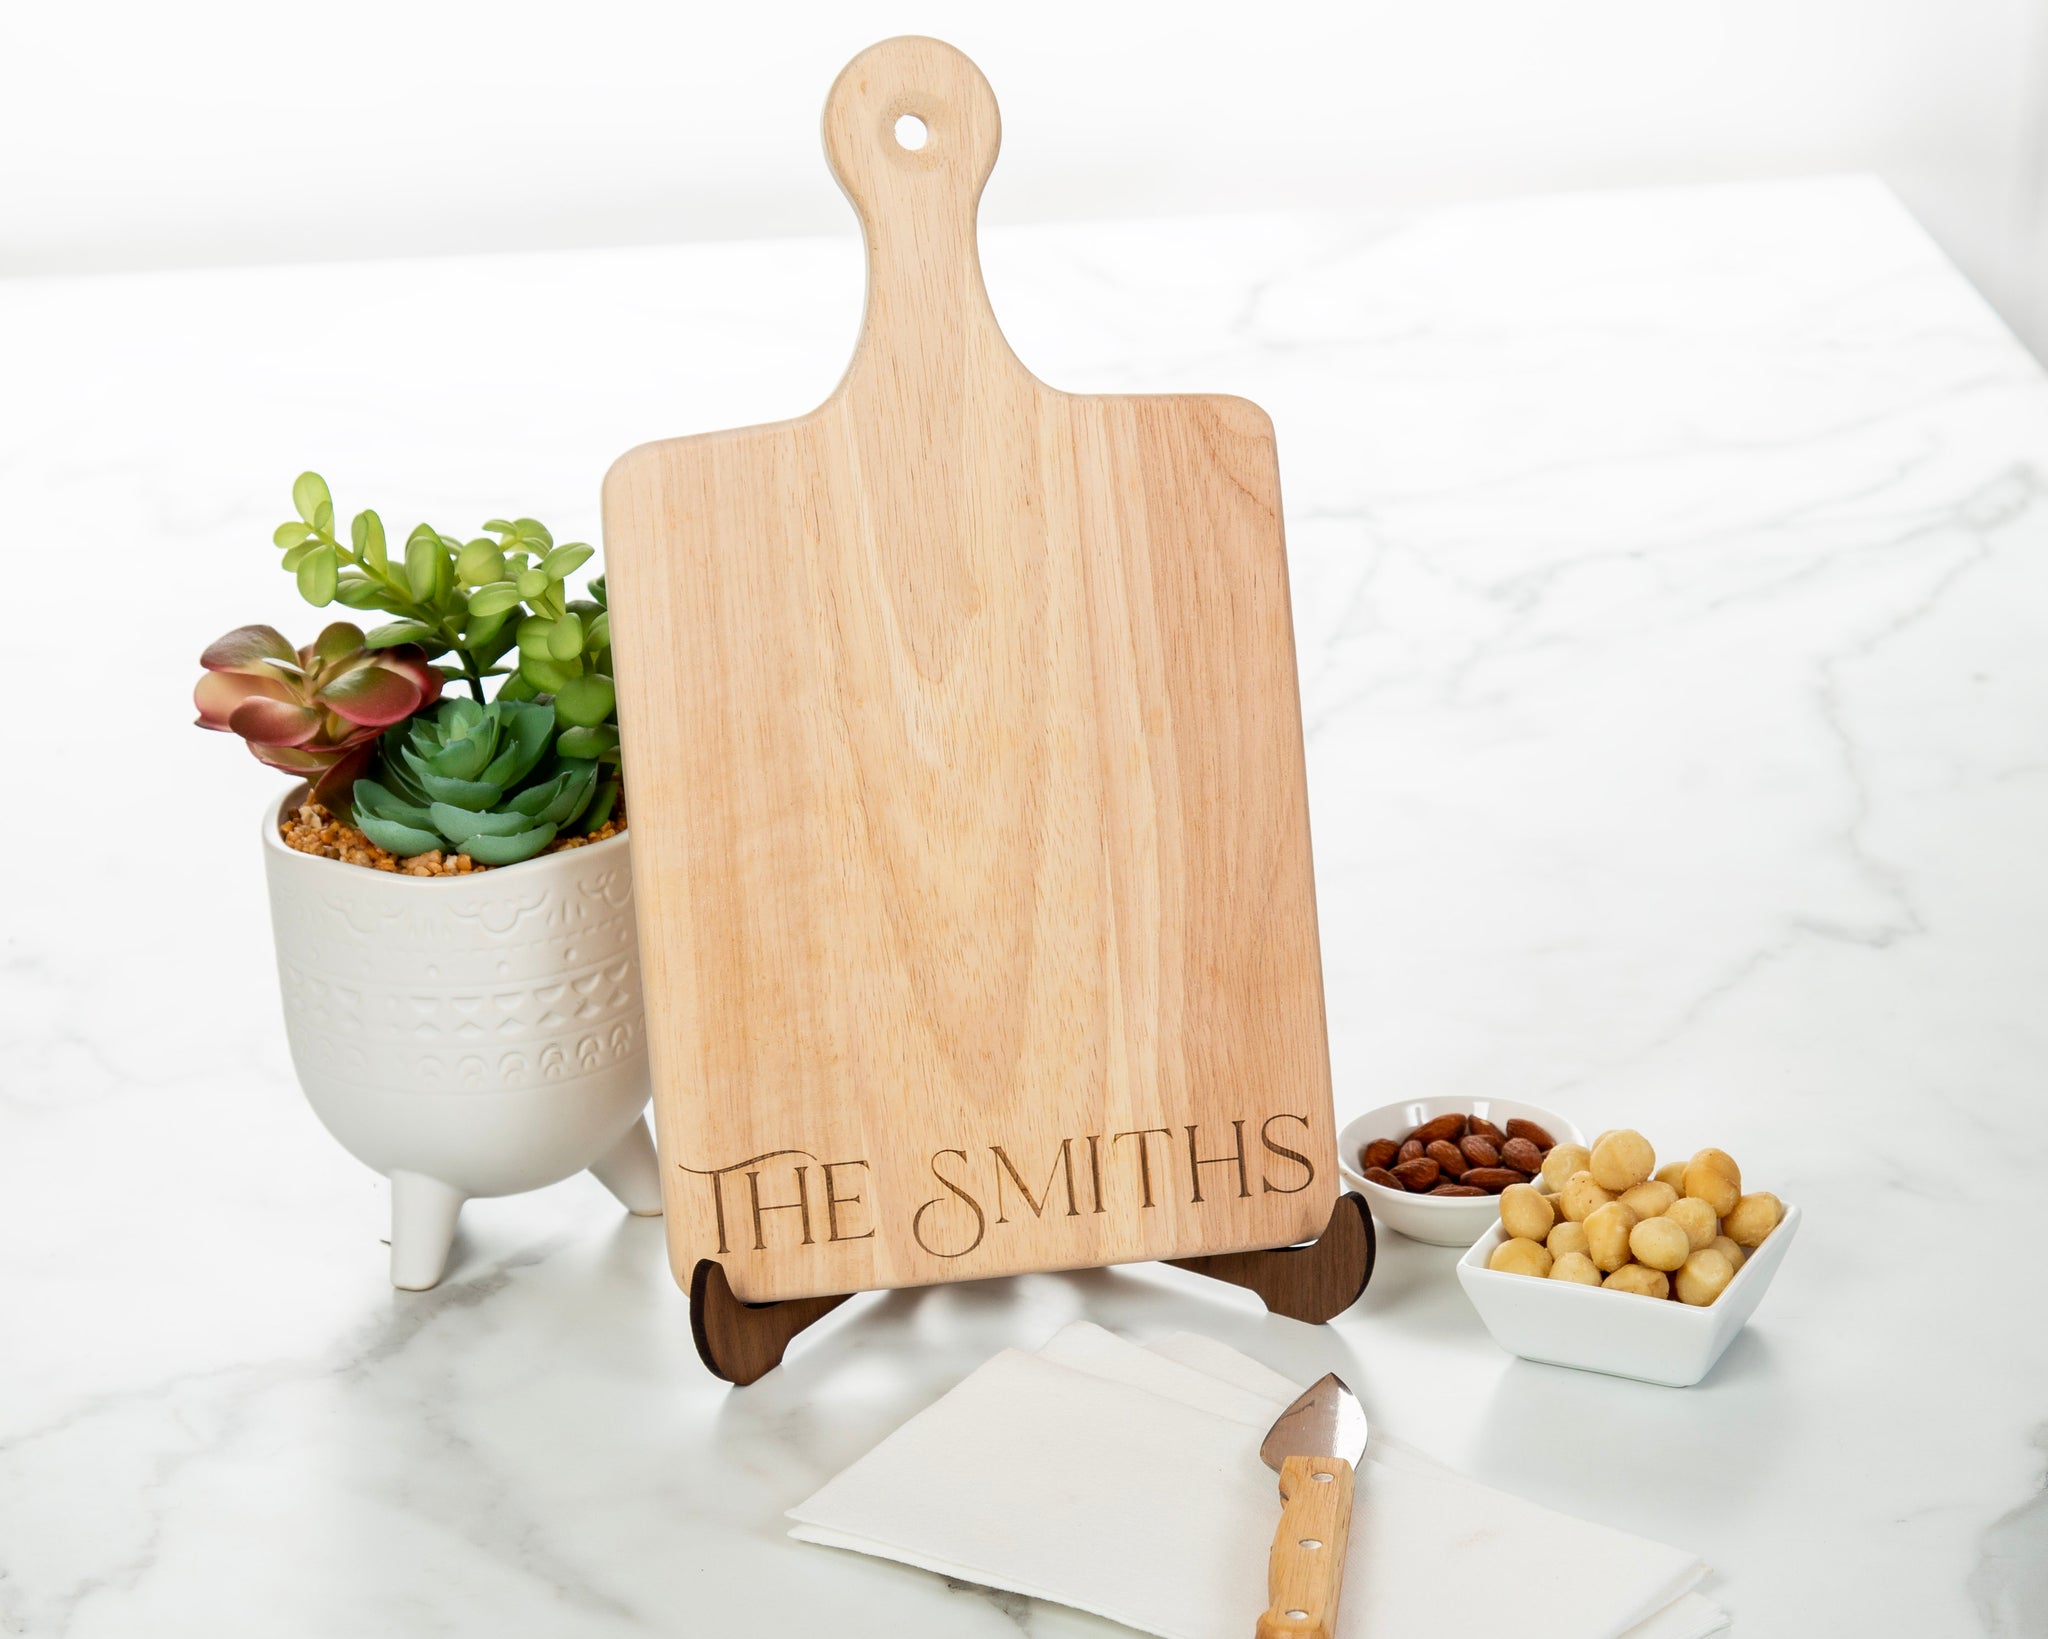 Personalized Charcuterie Board, Cutting Boards, Cheese Board, Corporate  Gifts, Wedding Gift, Housewarming Gift, Christmas Gift, Gift for Her 